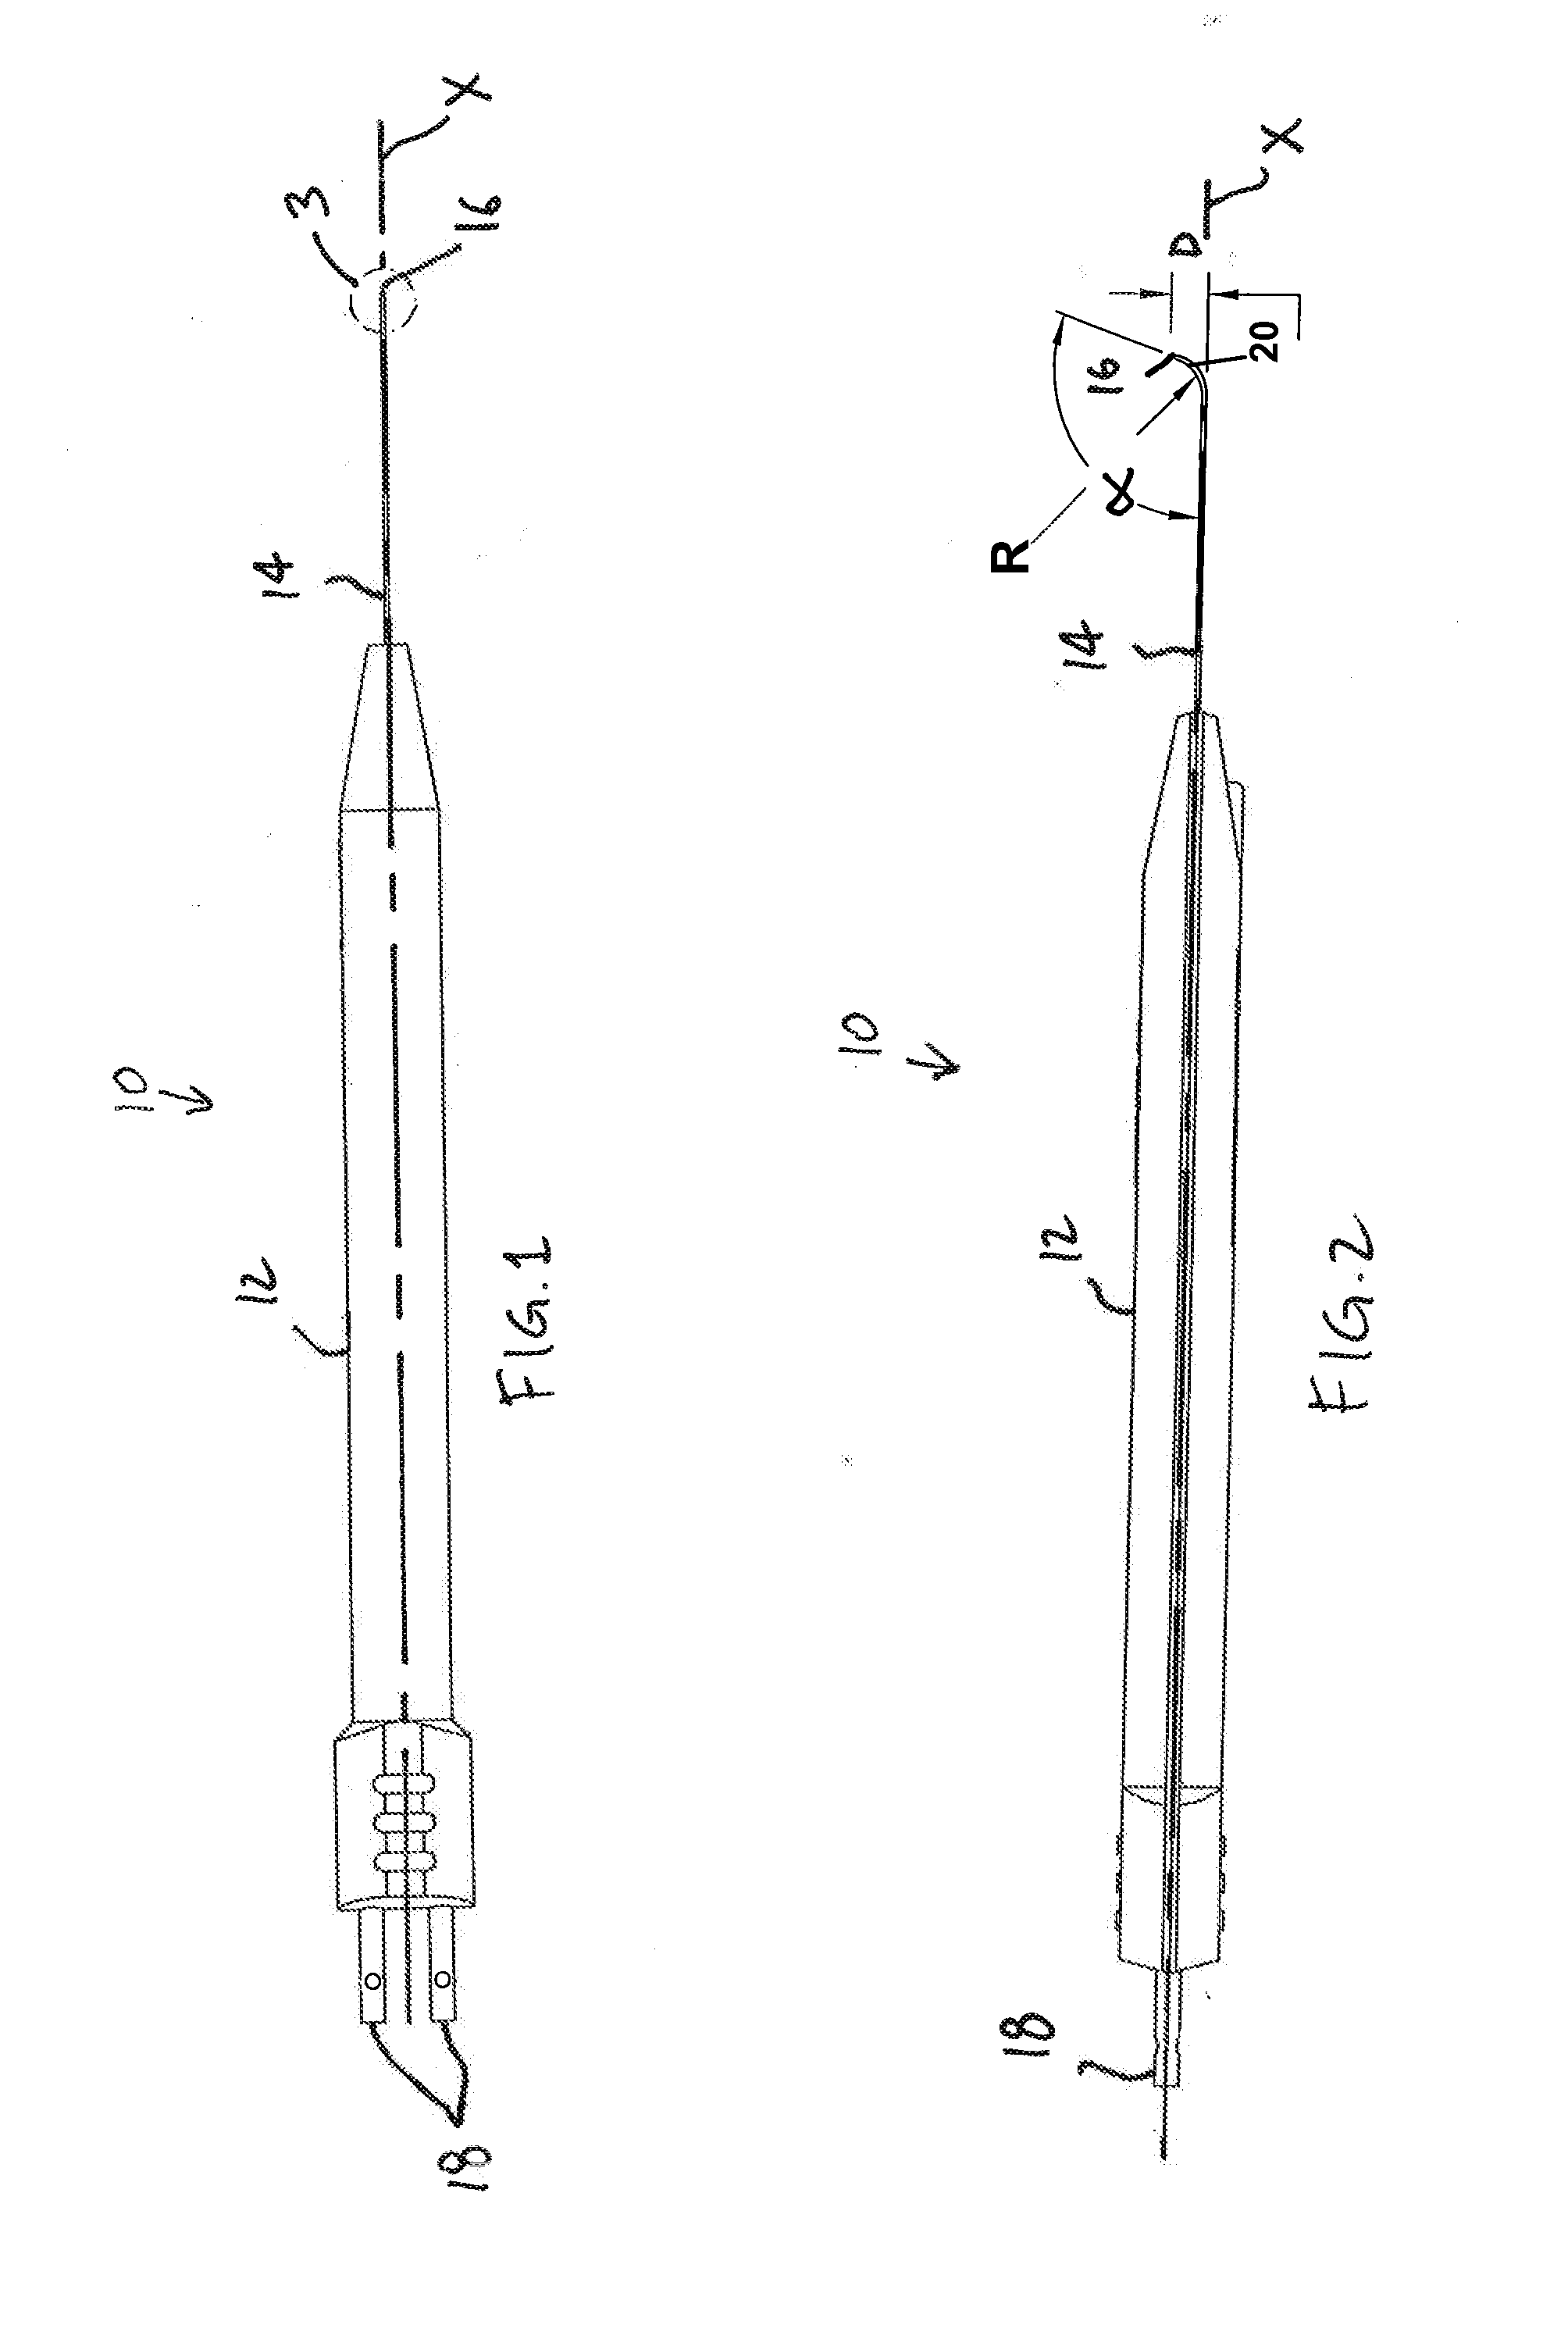 Method of, and device for, marking a patient's eye for reference during a toric lens implantation procedure